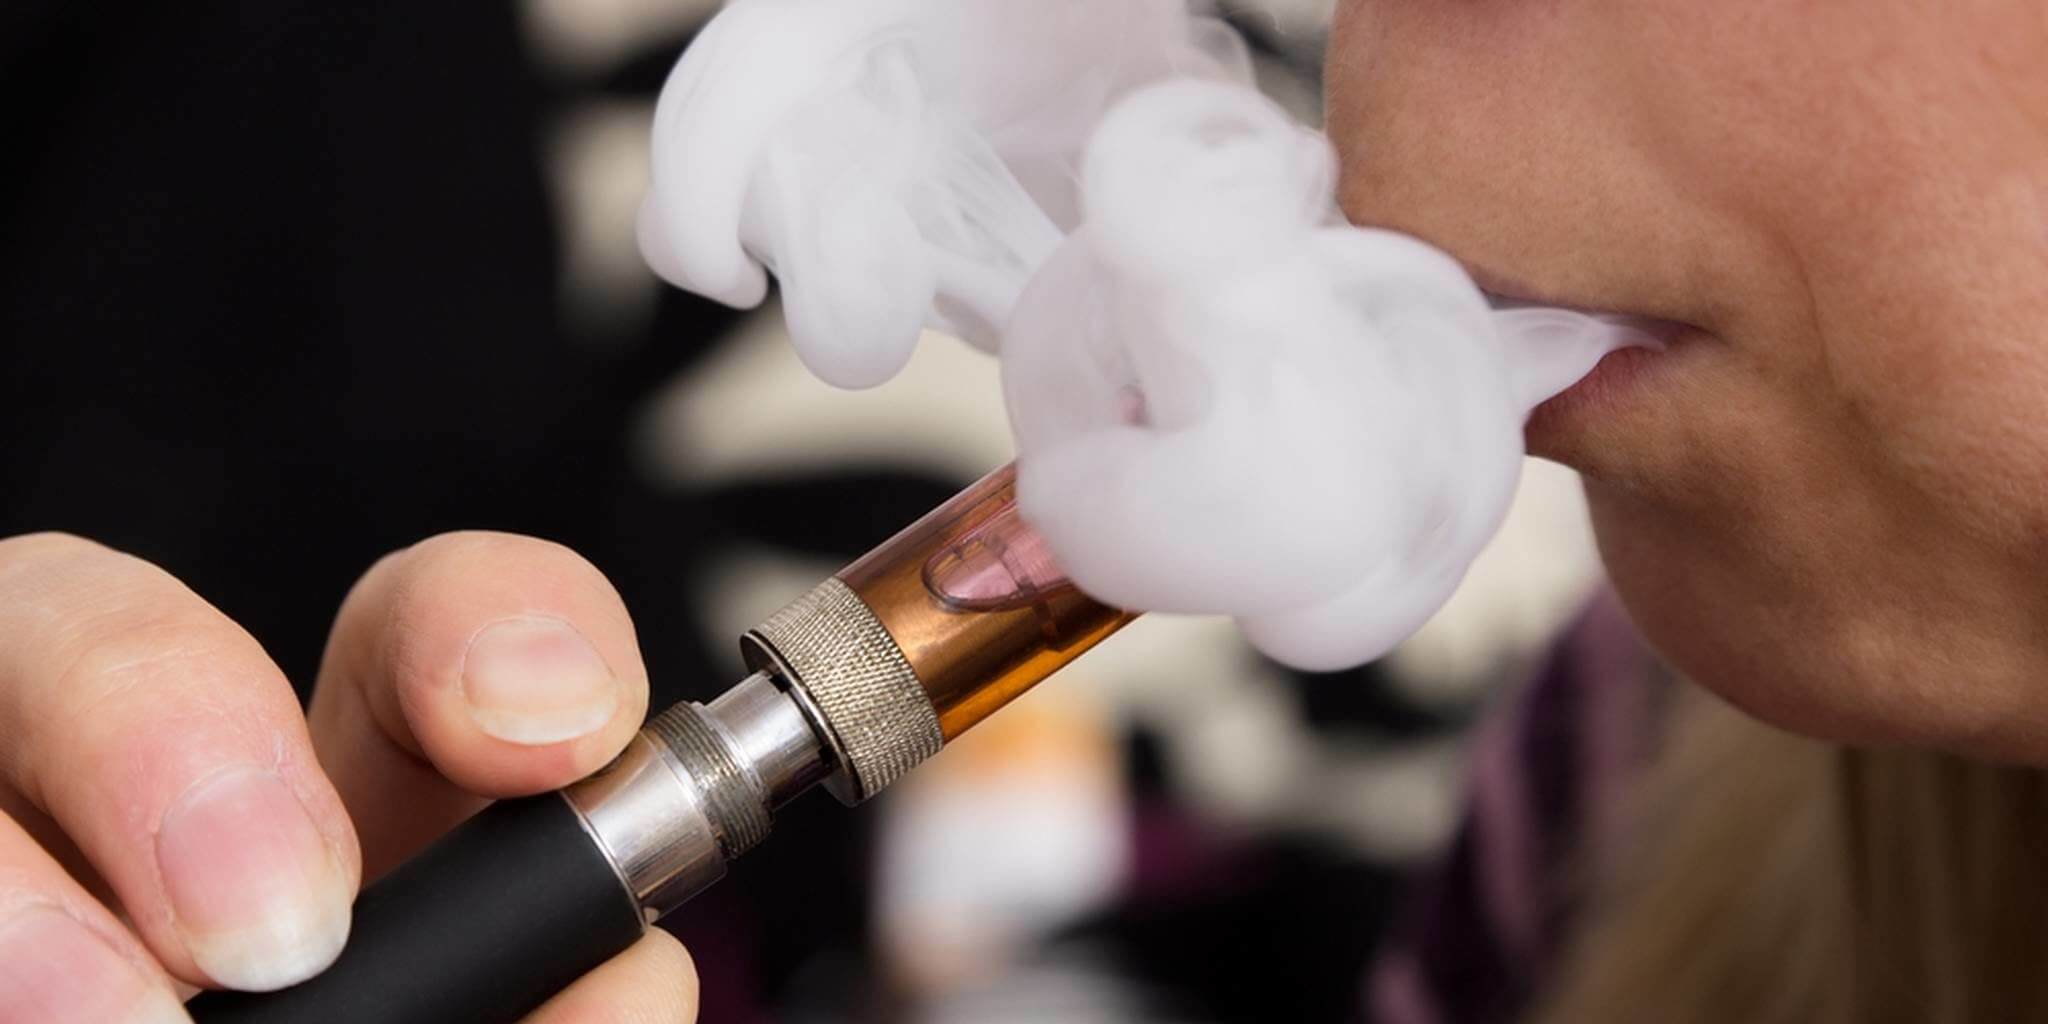 Vaping Raises Risk Of Heart Attack By 35%, According To US Study - WORLD OF BUZZ 2